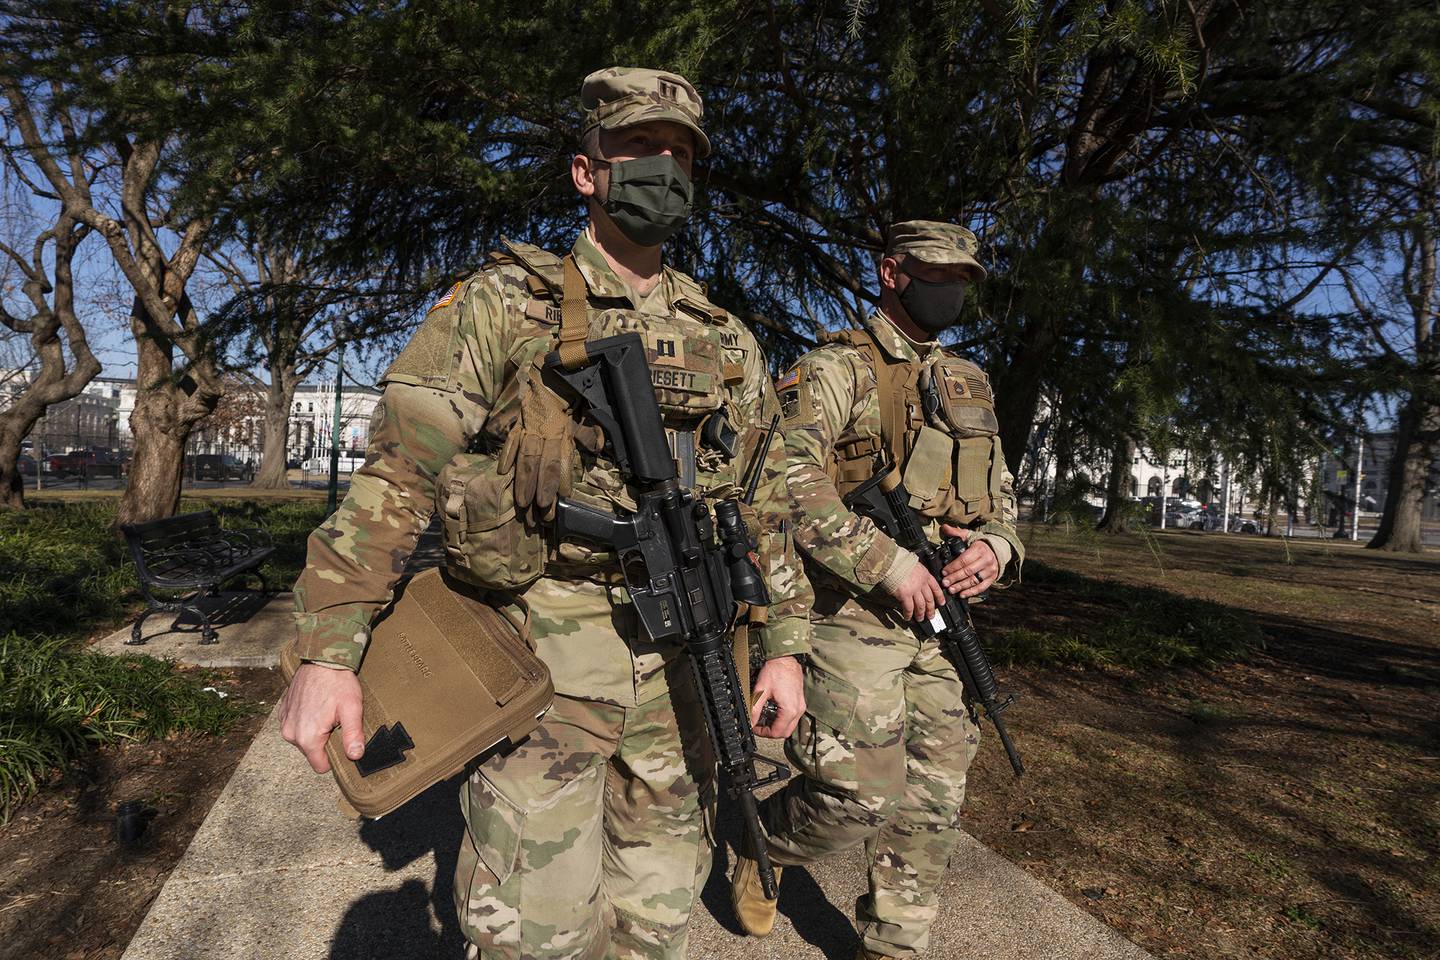 Armed members of the Maryland National Guard secures the perimeter around the U.S. Capitol, Wednesday, Jan. 13, 2021, in Washington.